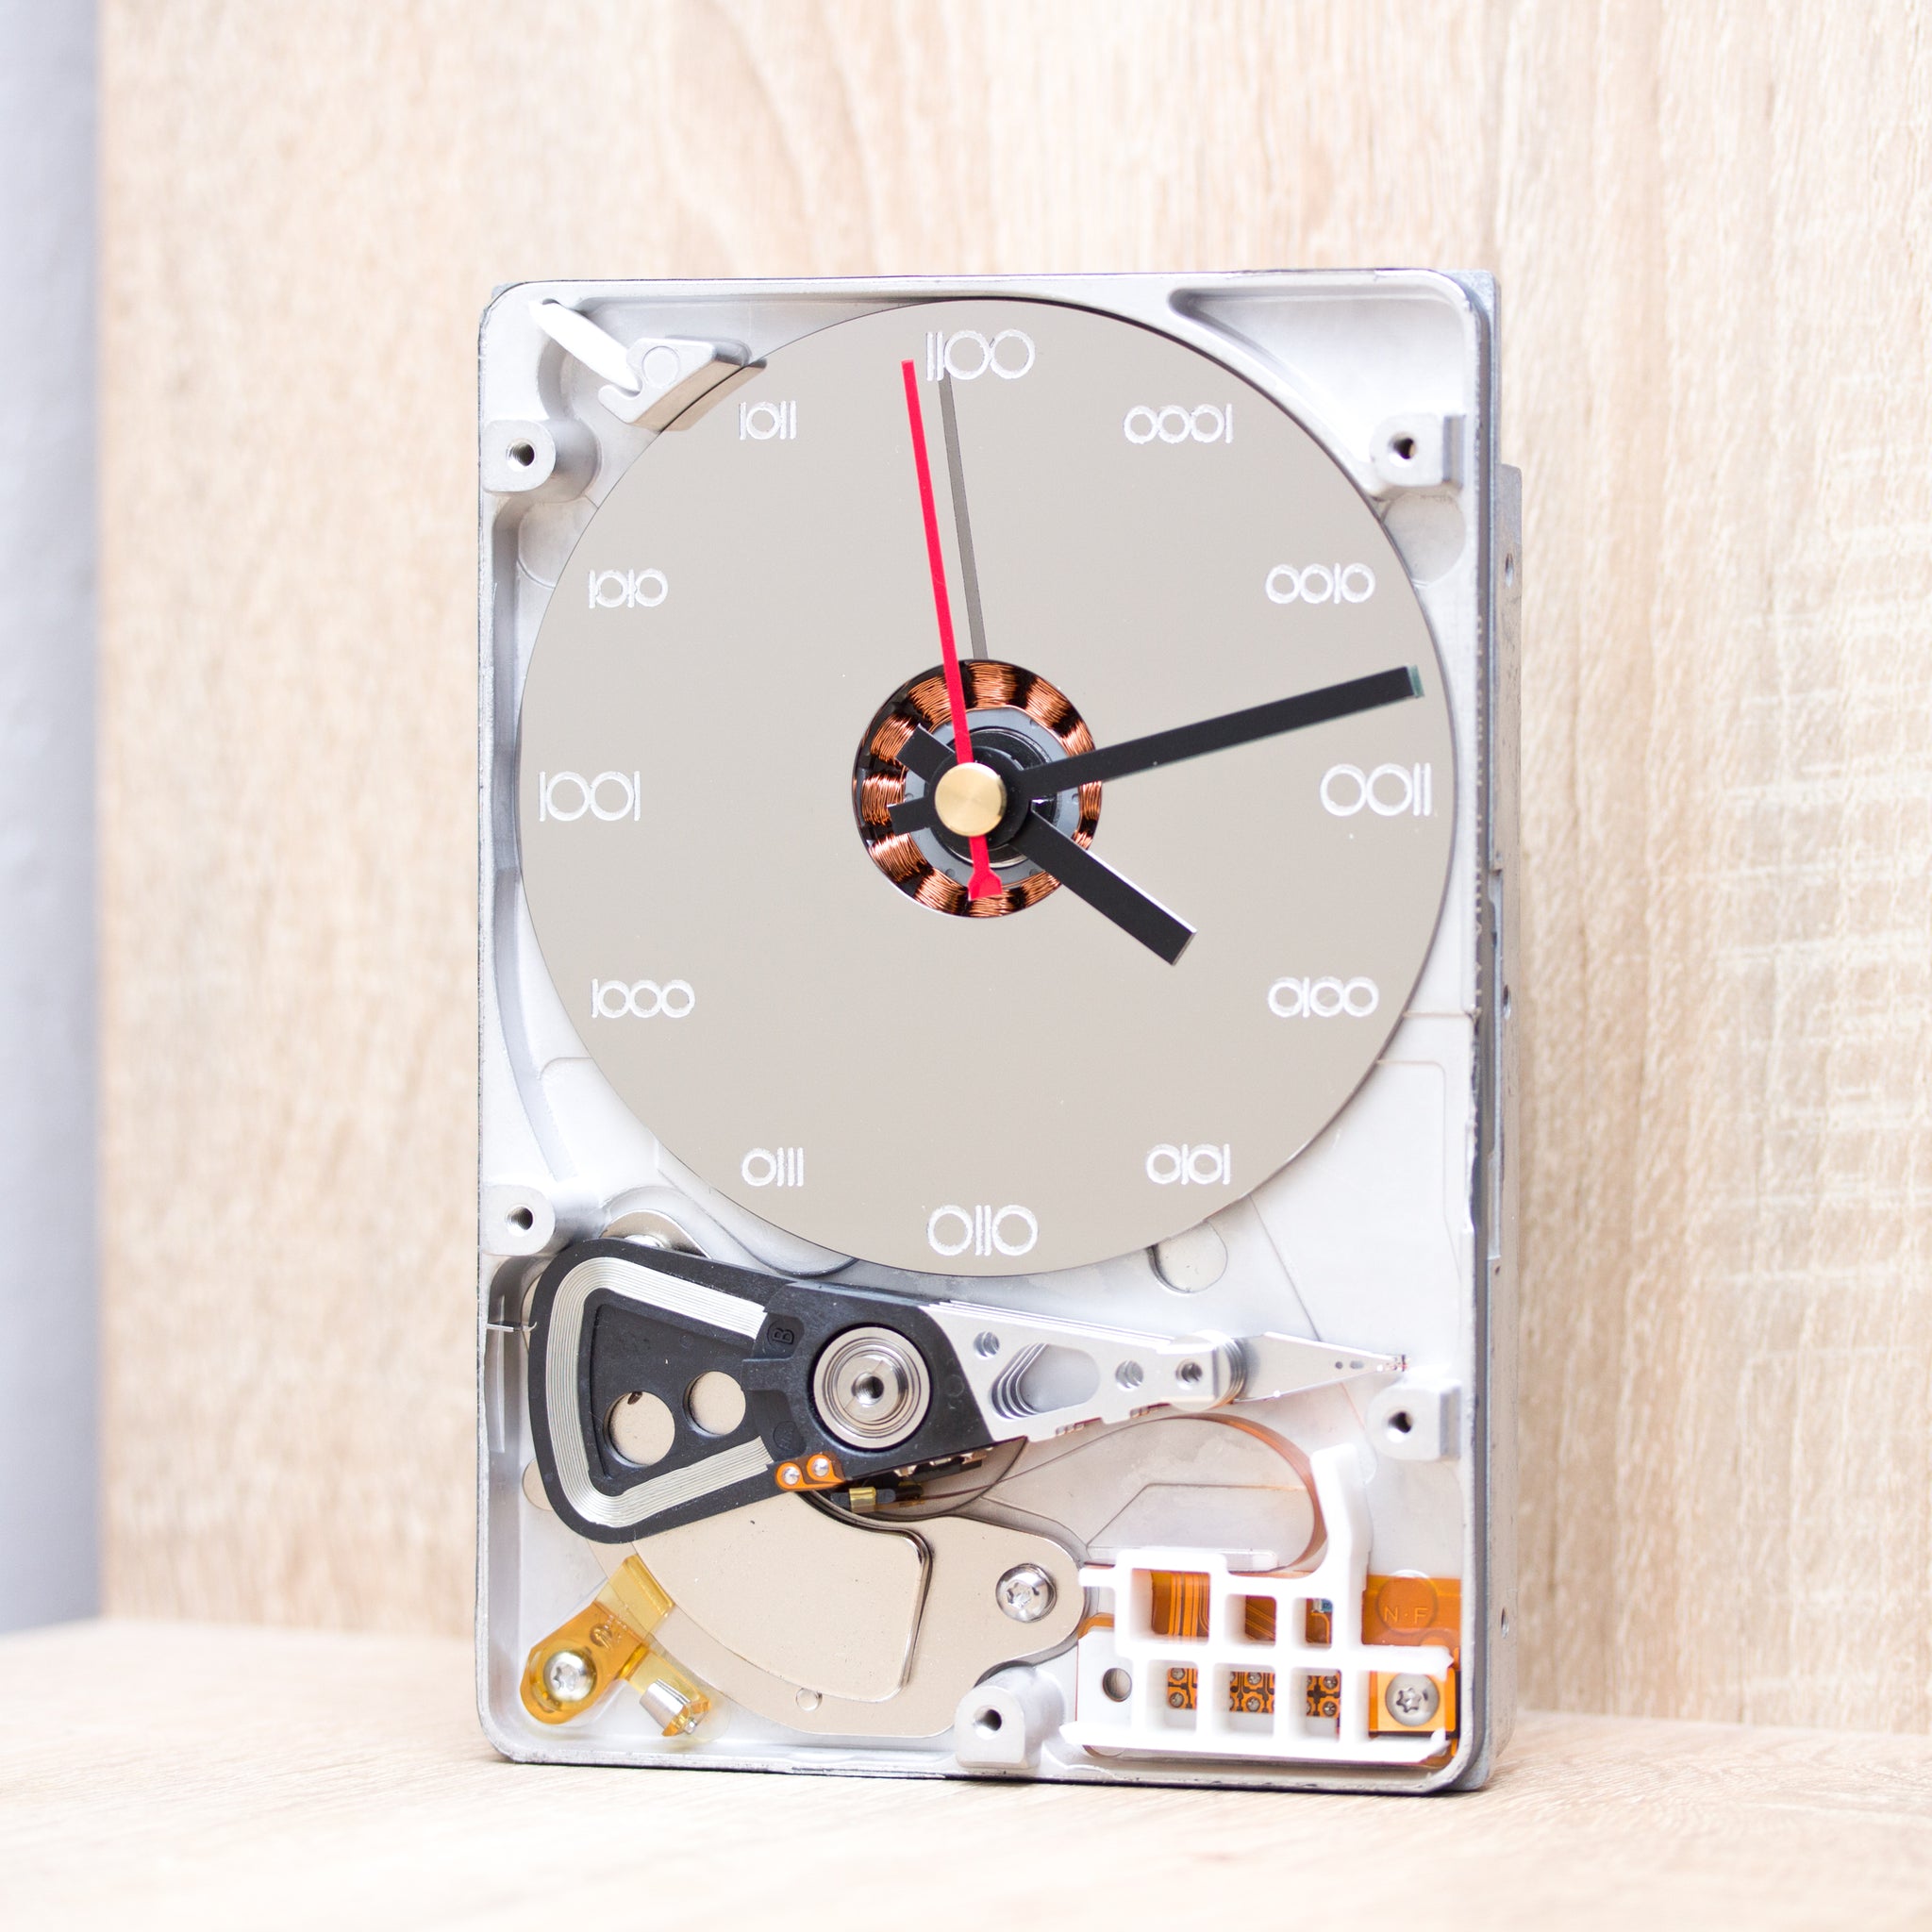 Clock for techie lover made of a recycled HDD